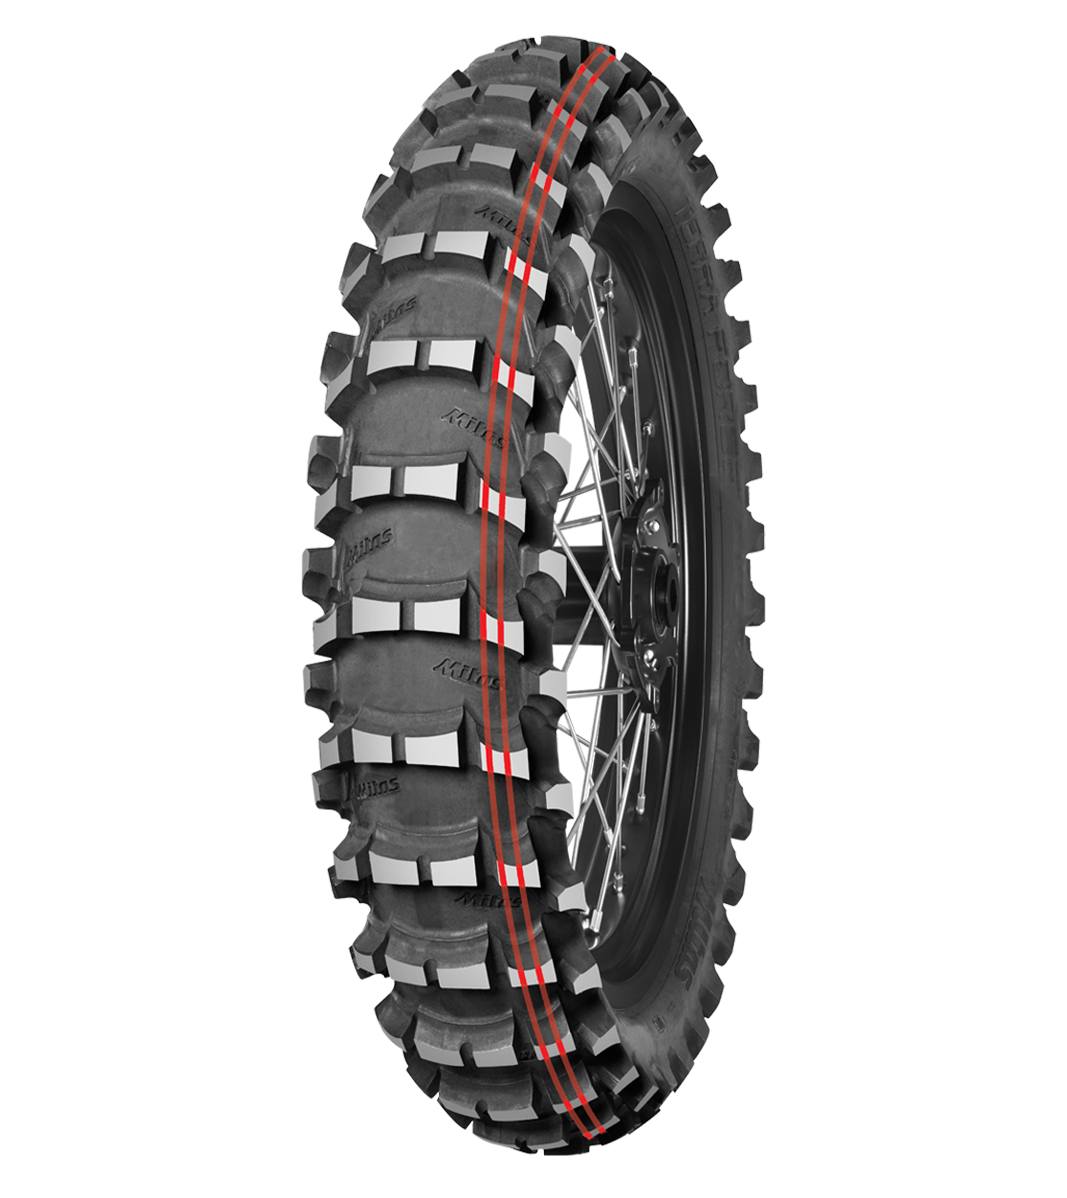 Mitas TERRA FORCE-MX Sand 120/80-19 Motocross Competition Off-Road Sand 63M 2 Red Tube Rear Tire, 226517, 120/80-19, Motocross, Motocross Competition, Off-Road, Rear, Terra Force, Terra Force-MX Sand, Trail, Tires - Imported and distributed in North & South America by Lindeco Genuine Powersports - Premier Powersports Equipment and Accessories for Motorcycle Enthusiasts, Professional Riders and Dealers.